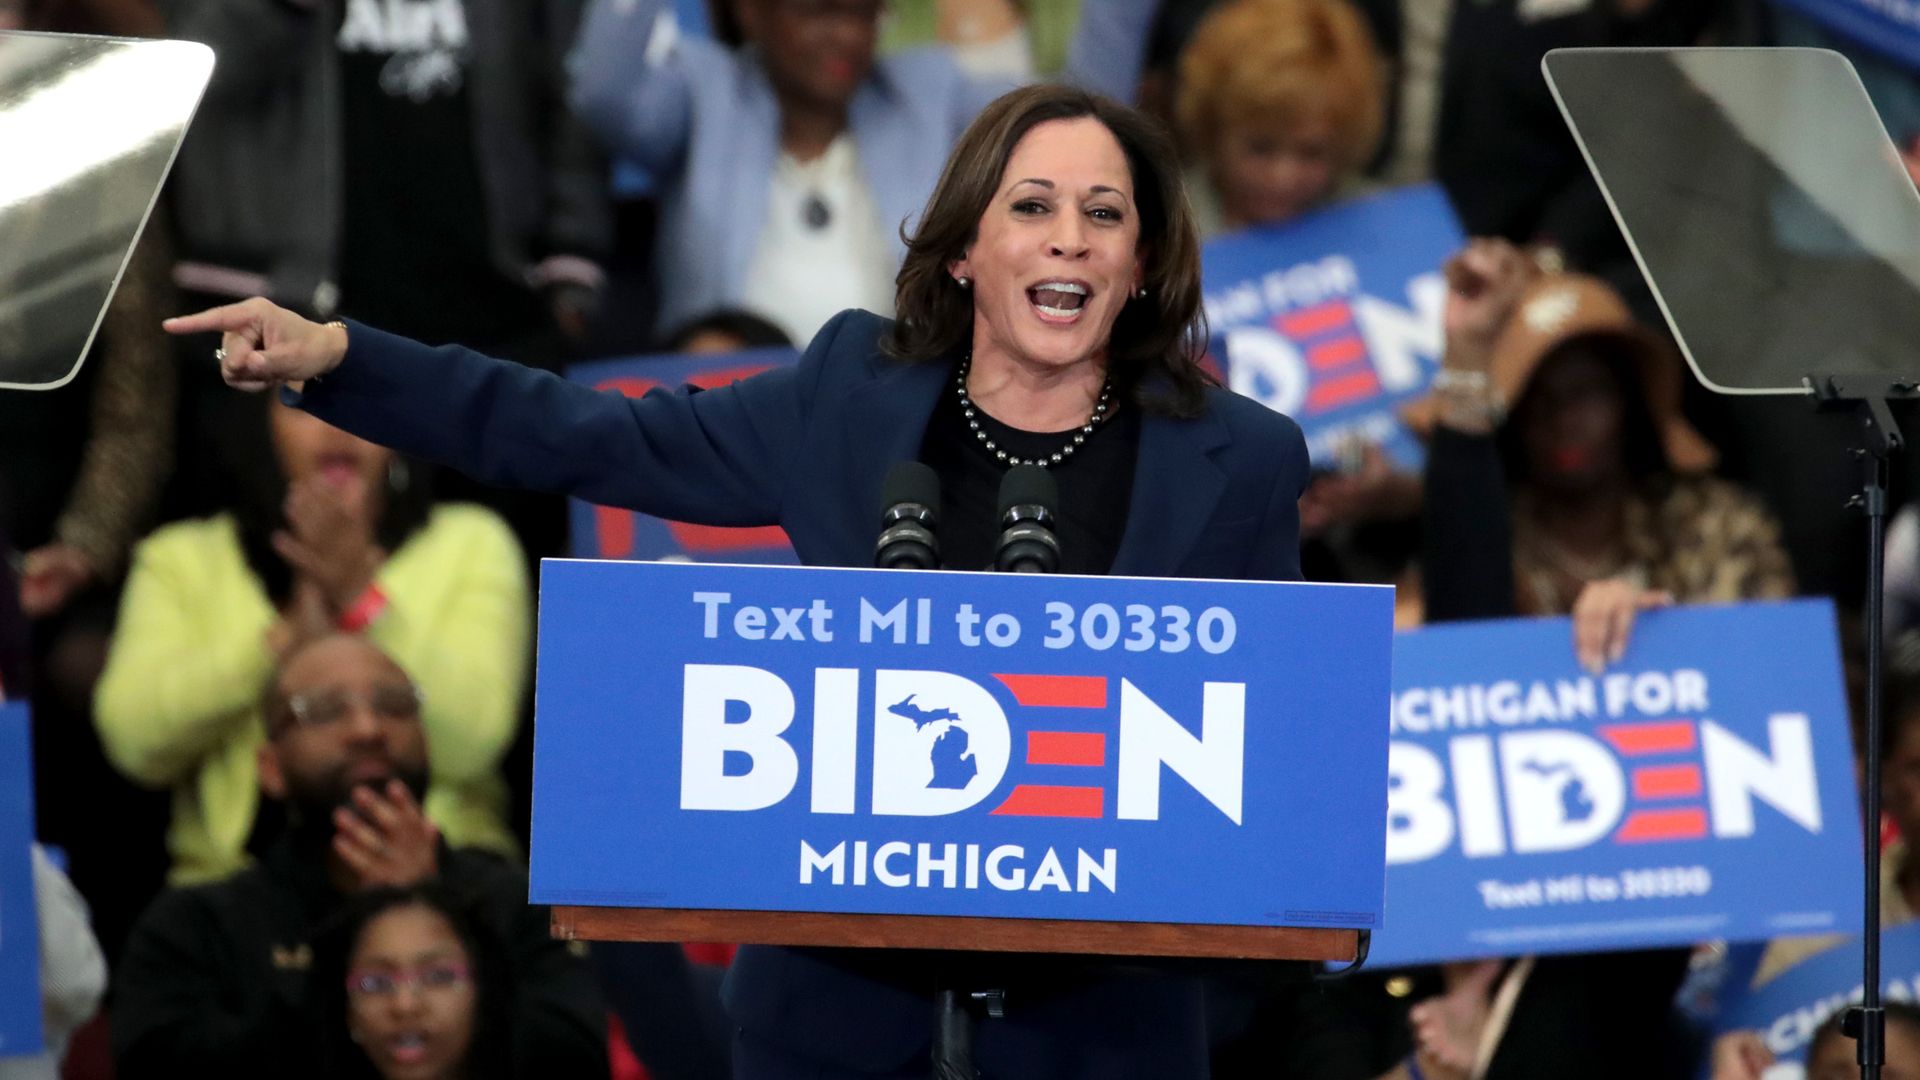 Sen. Kamala Harris passionately speaks at a podium with the Joe Biden campaign sign at an event